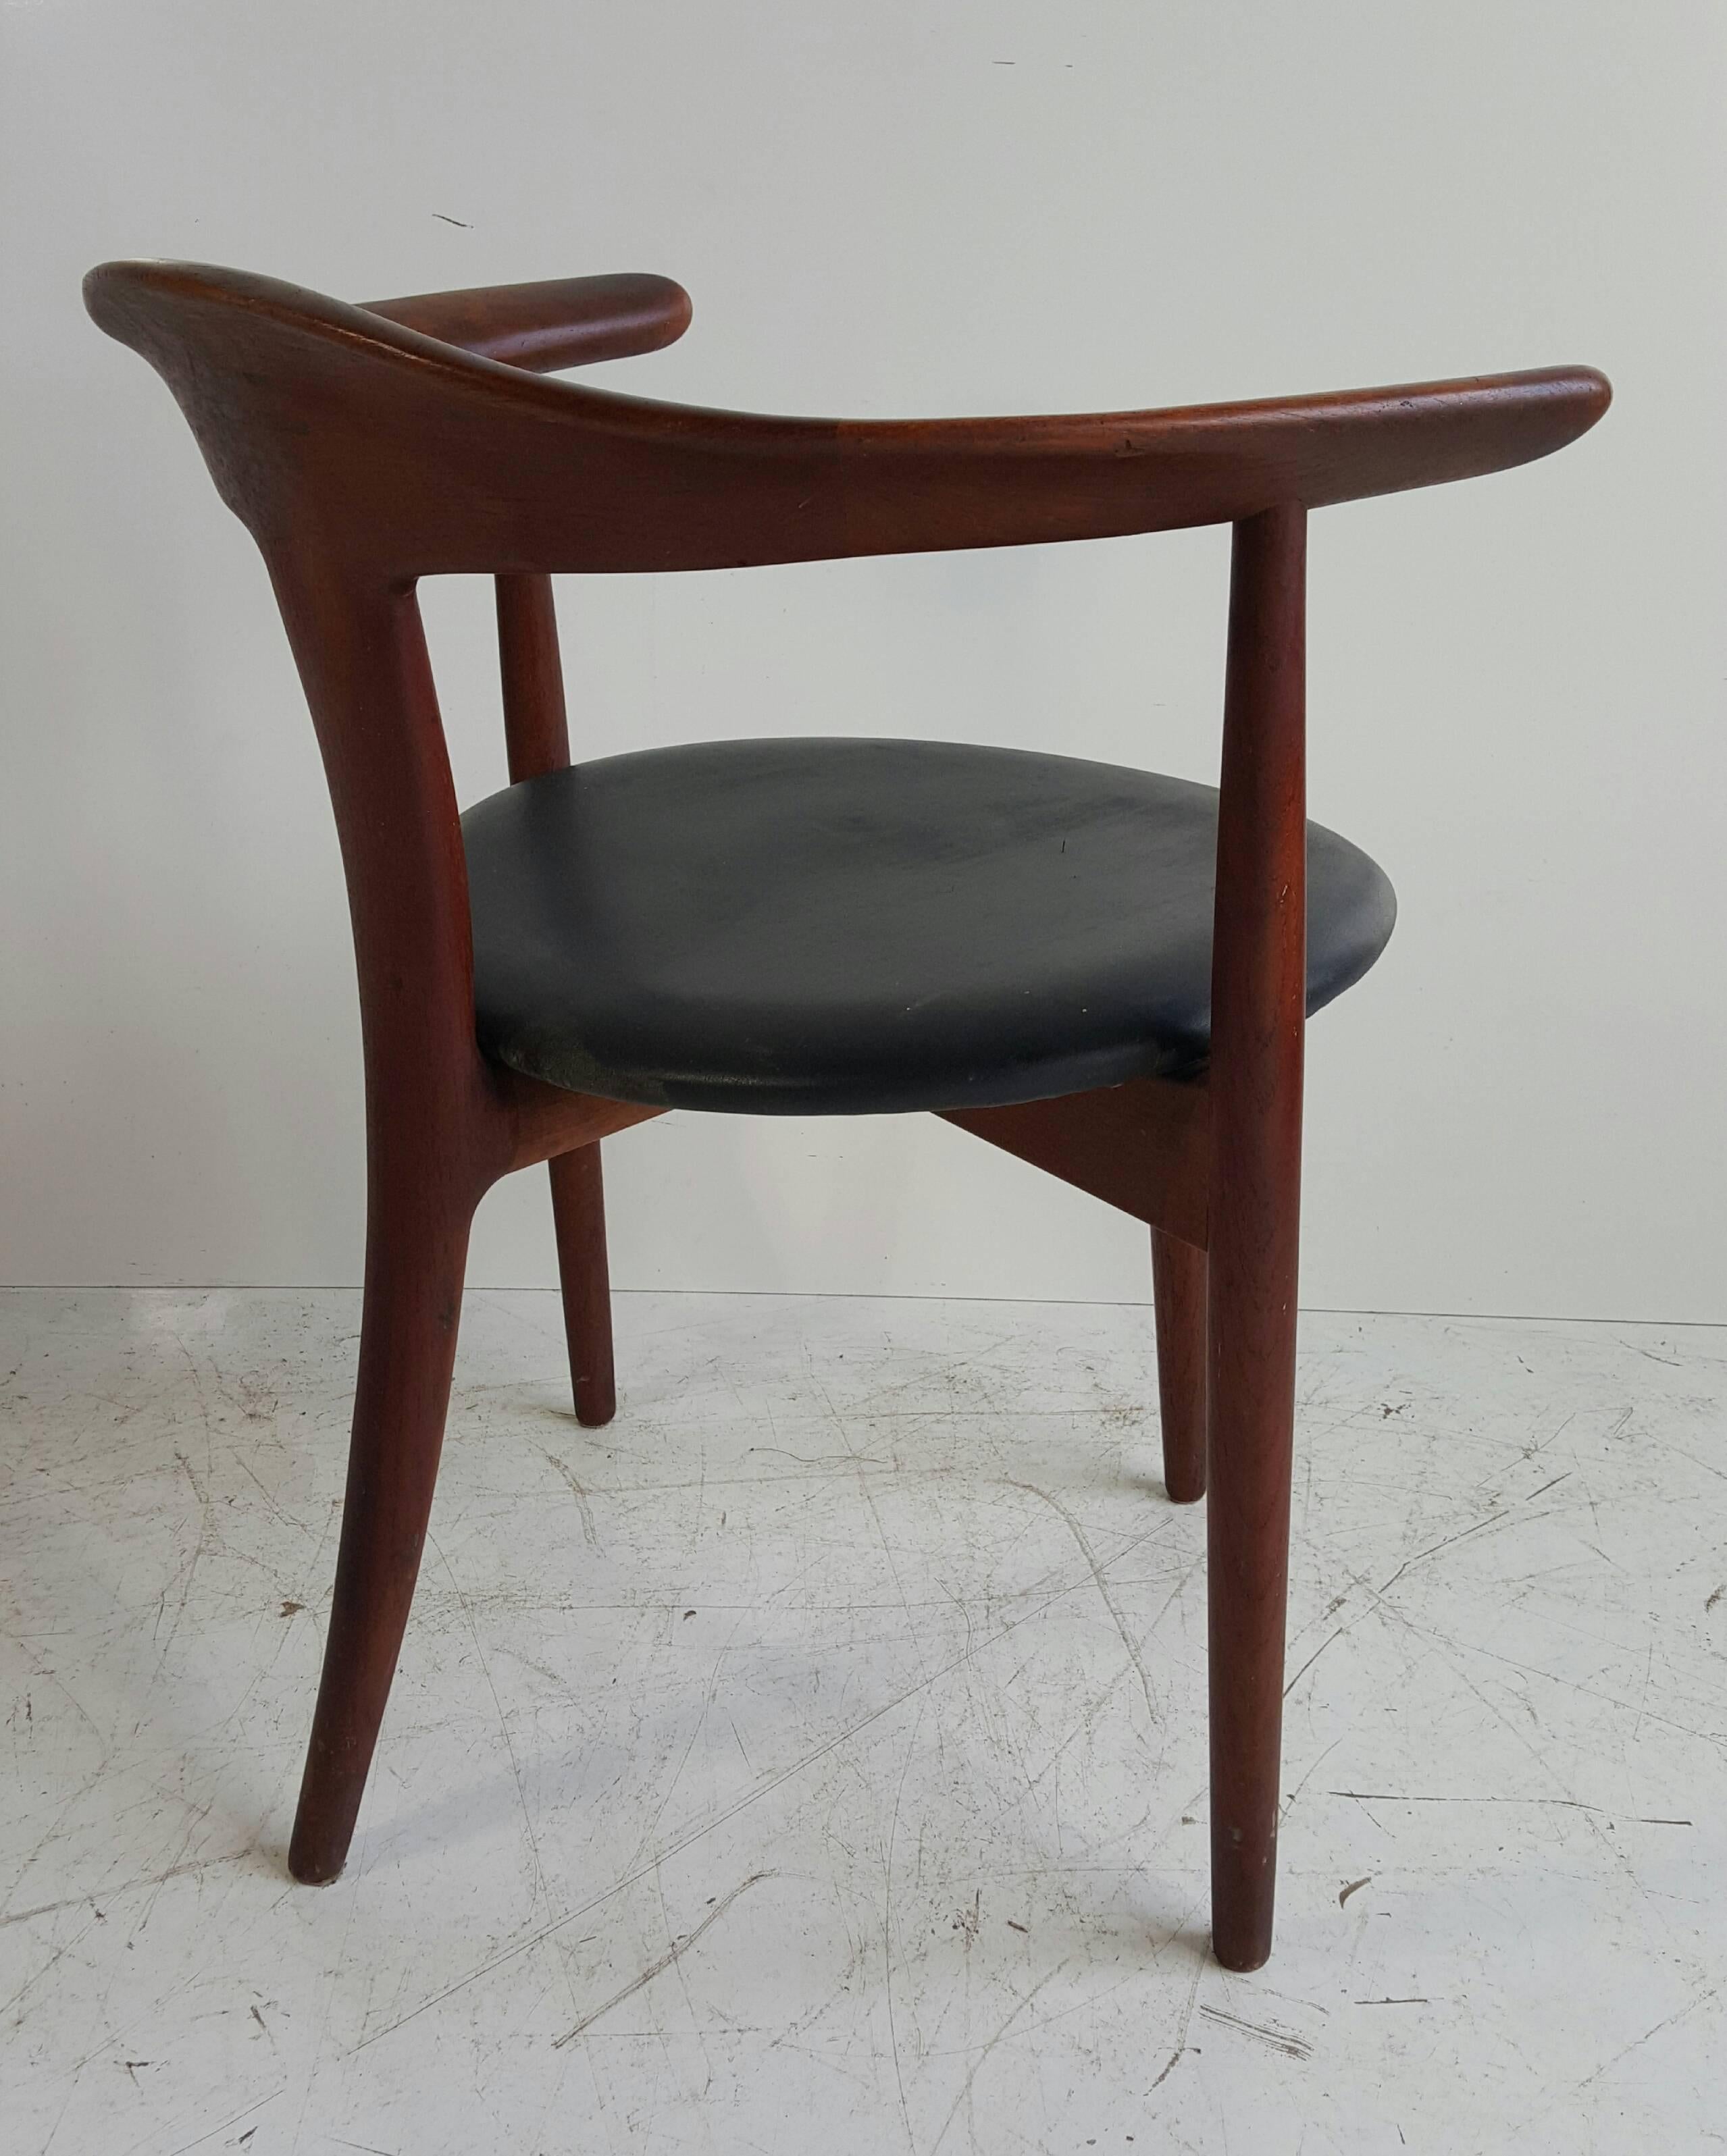 20th Century Modernist Sculptural Walnut and Leather Armchair by Johannes Andersen